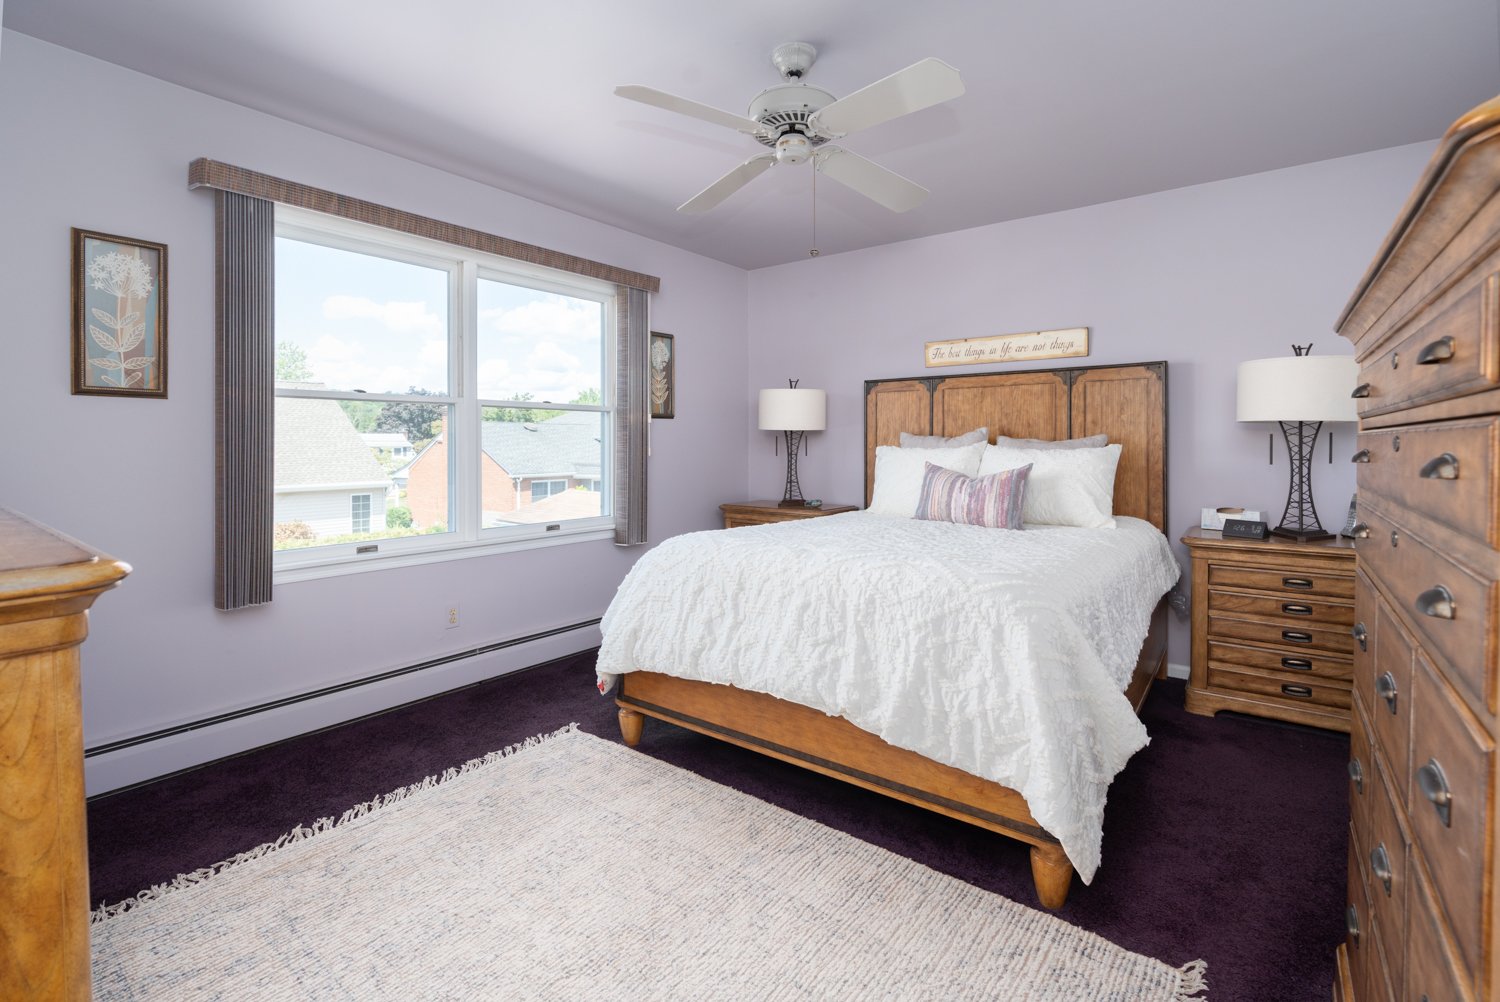 PRIMARY BED 162 Washington real estate (Low res)-6.jpg